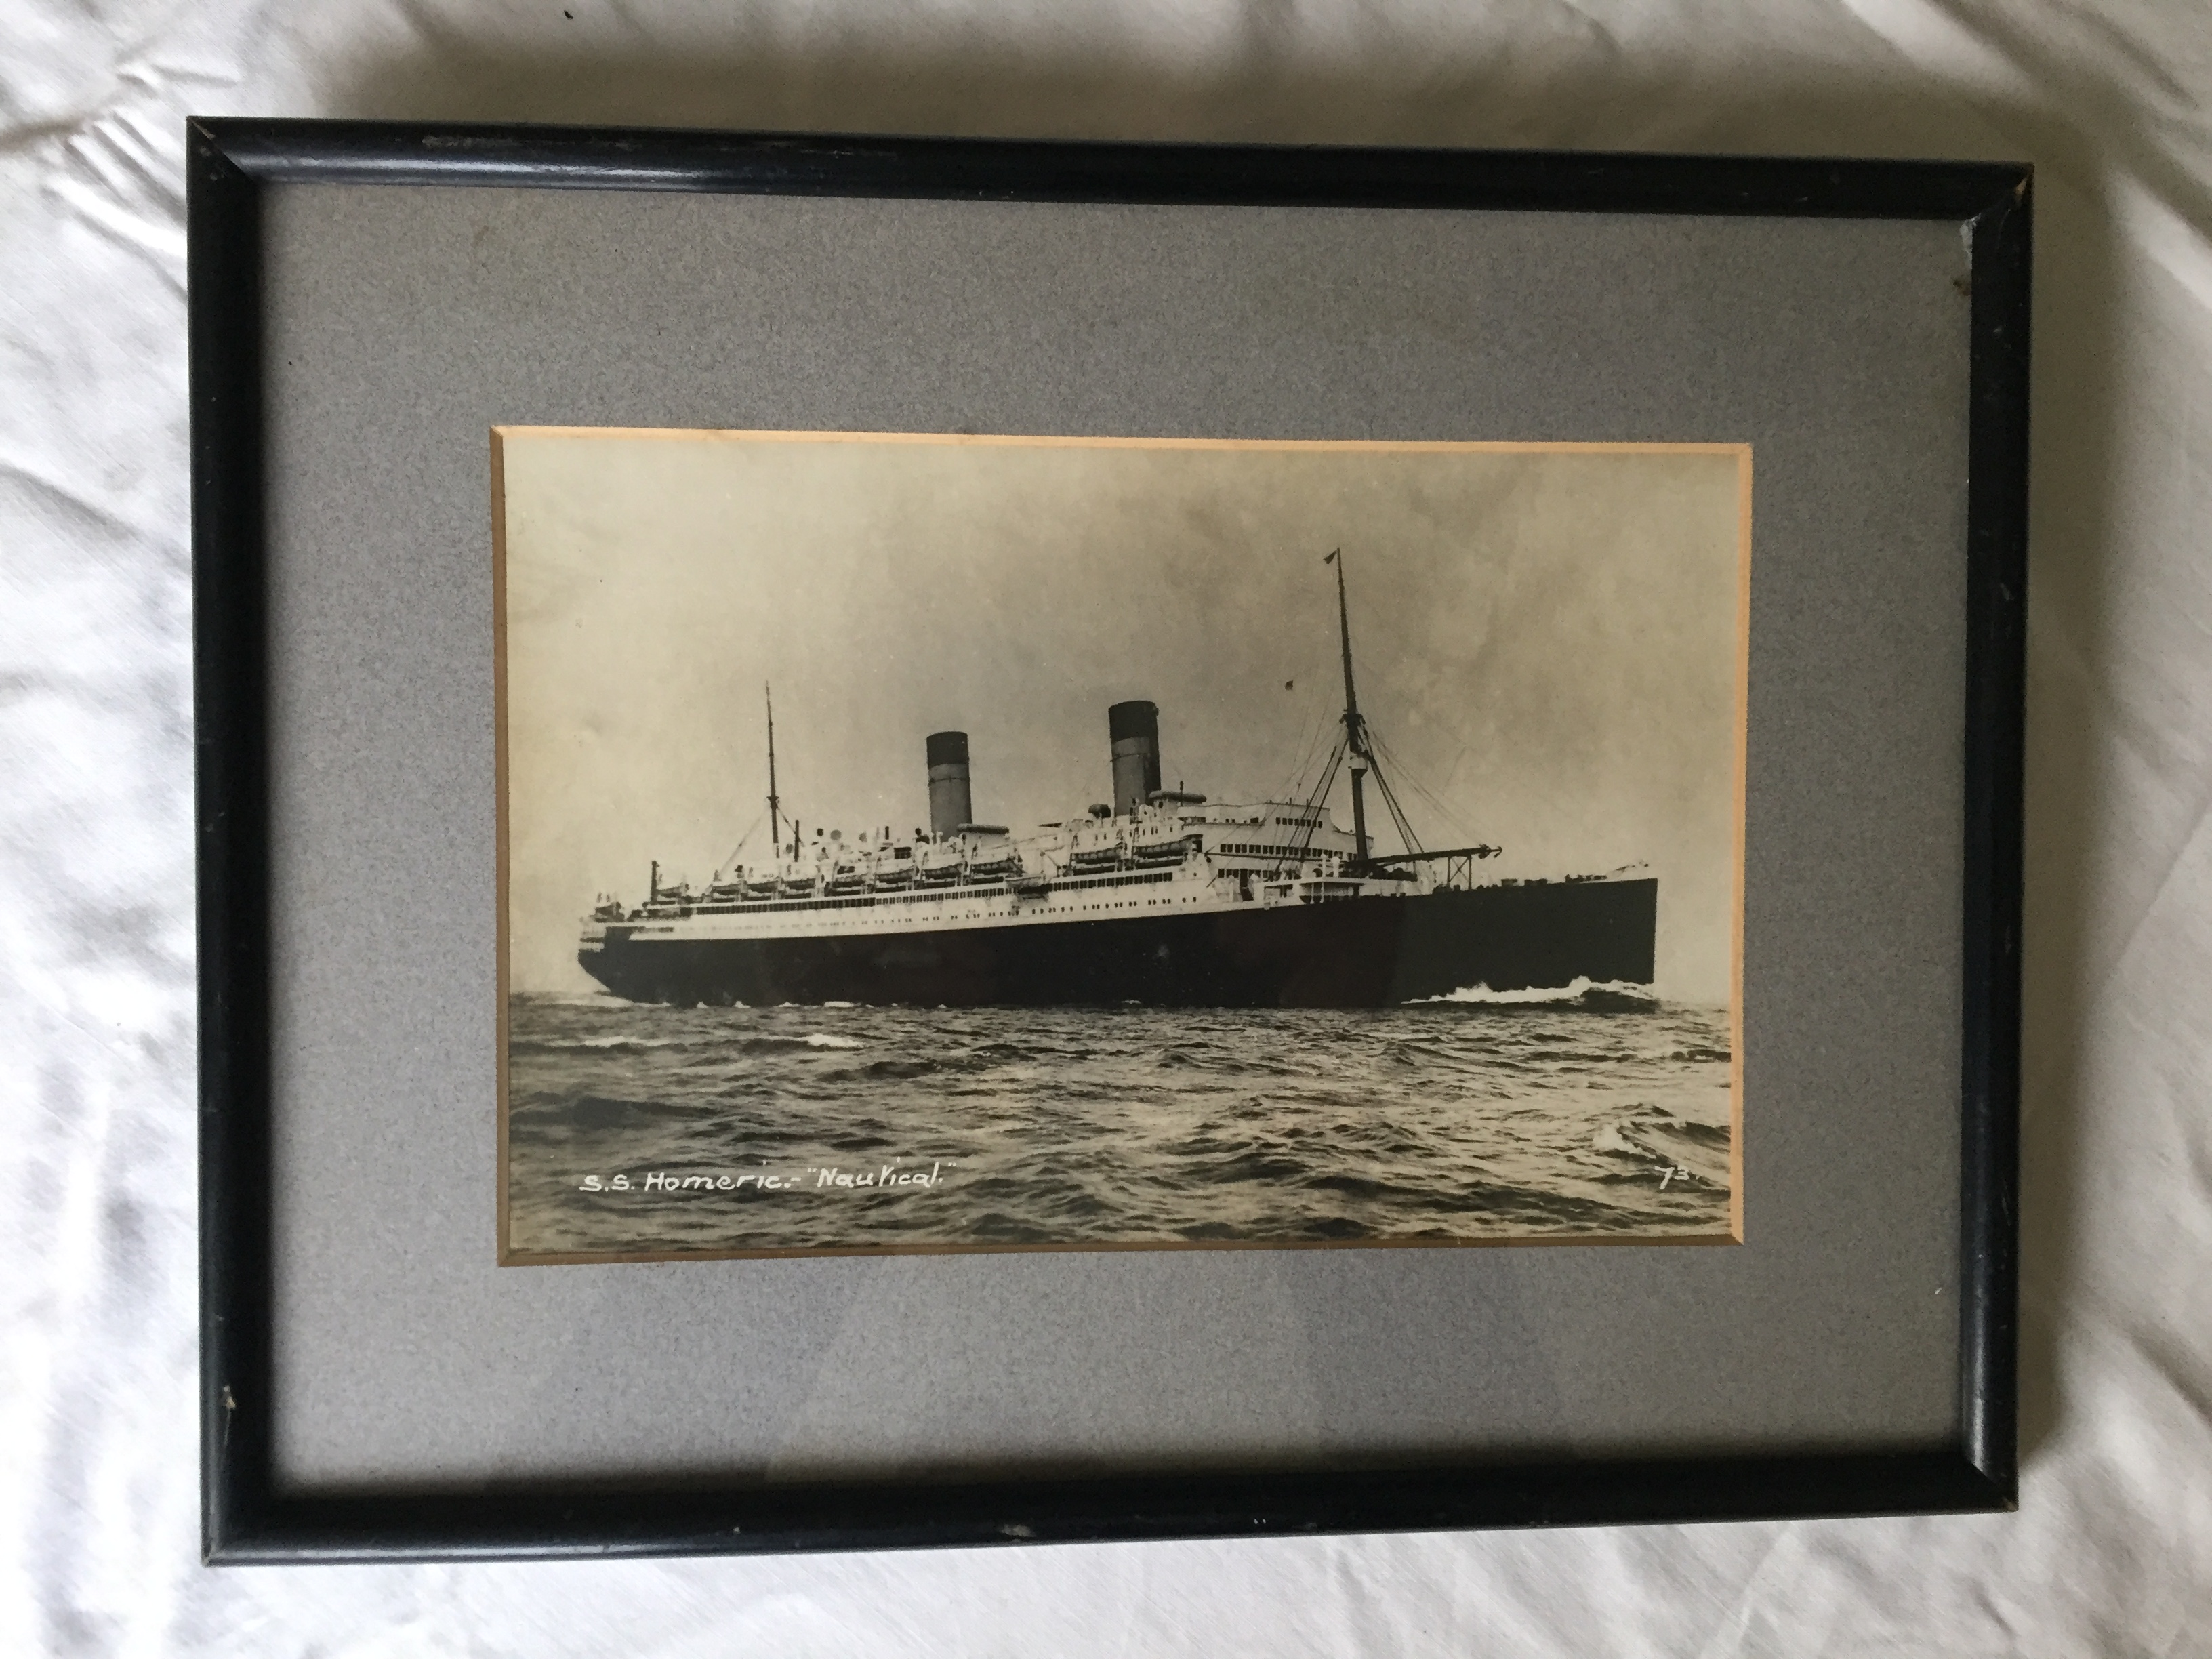 VERY EARLY FRAMED B/W PHOTOGRAPH THE WHITE STAR LINE VESSEL THE RMS HOMERIC